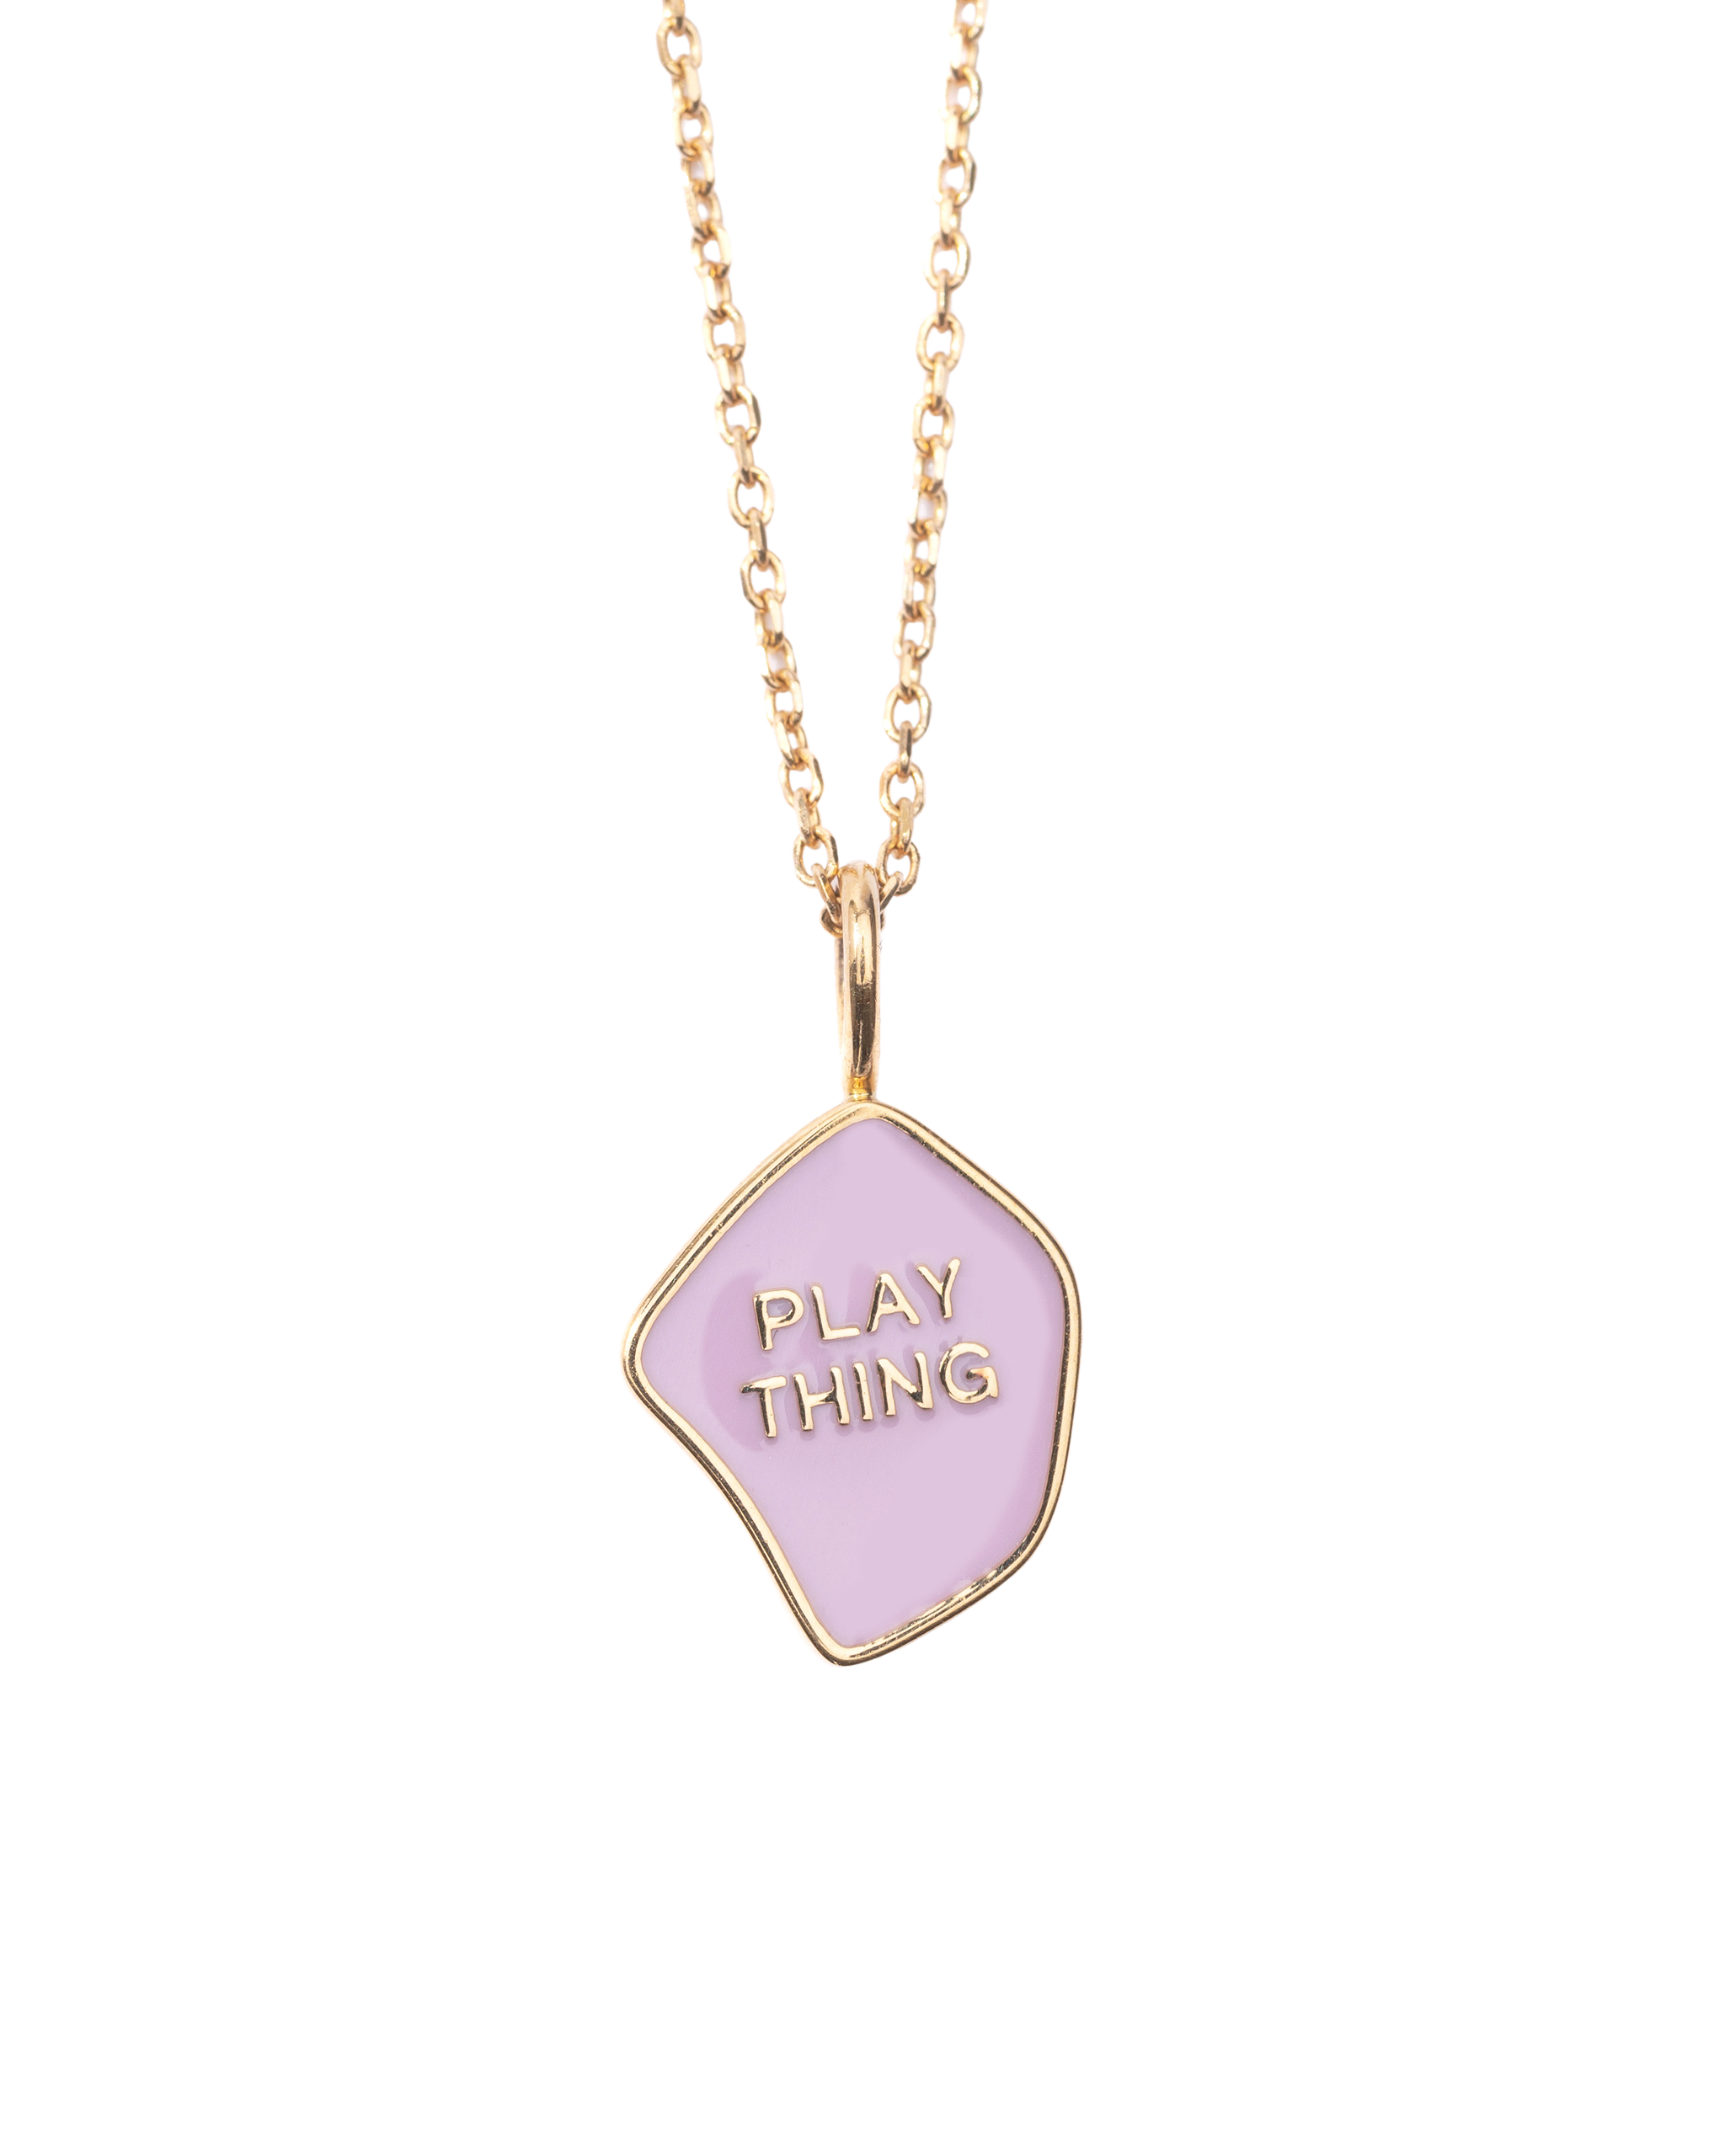 The "Play Thing" Necklace